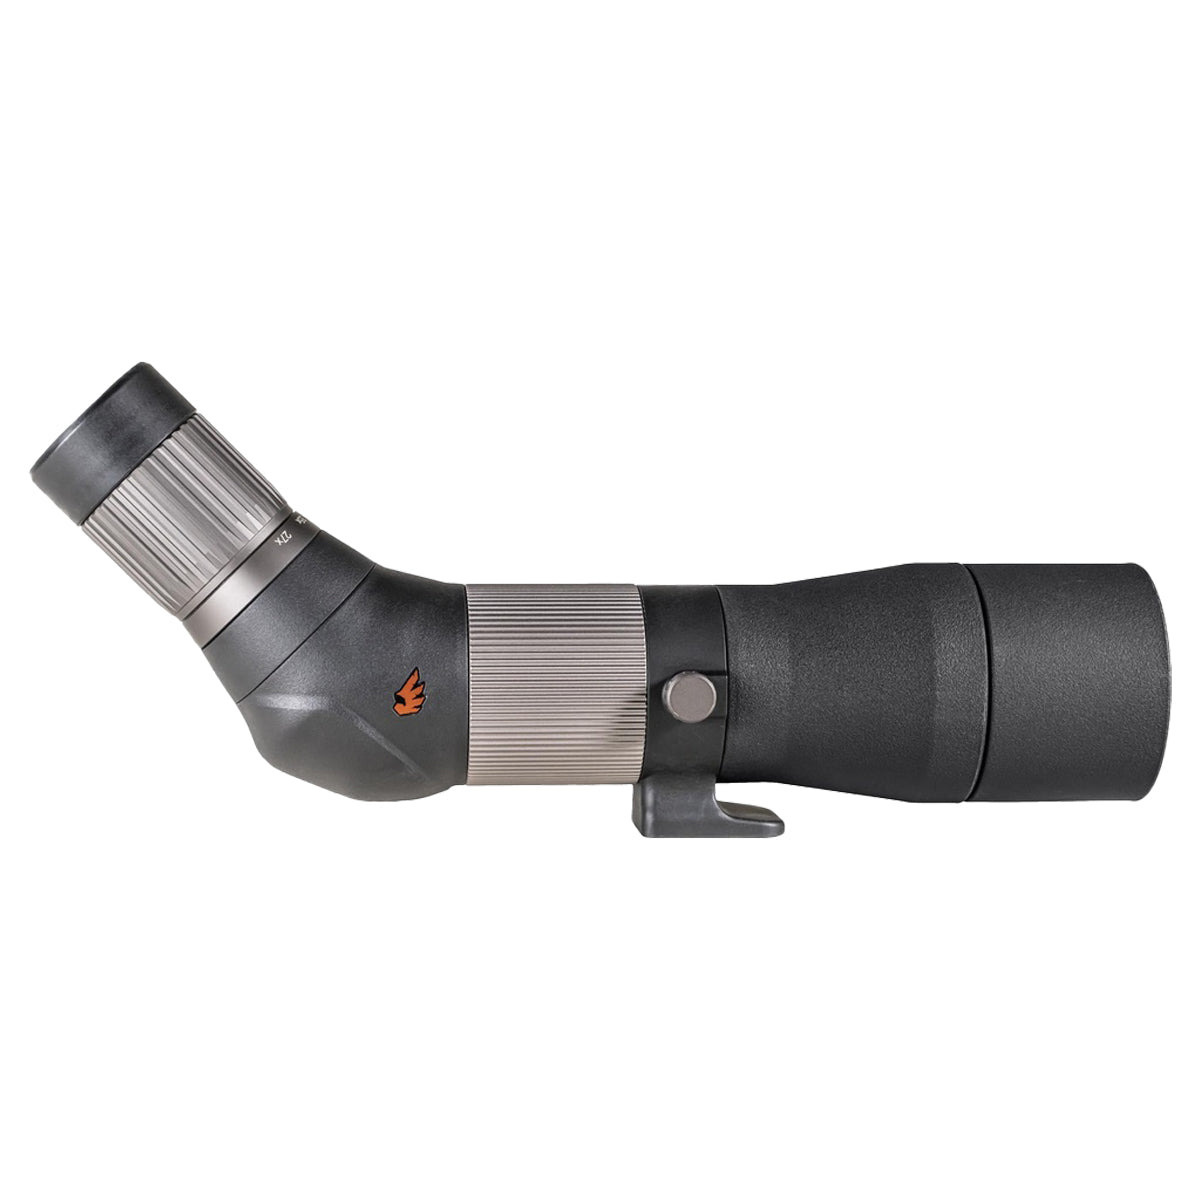 Revic Acura S65a Angled Spotting Scope in  by GOHUNT | Revic - GOHUNT Shop